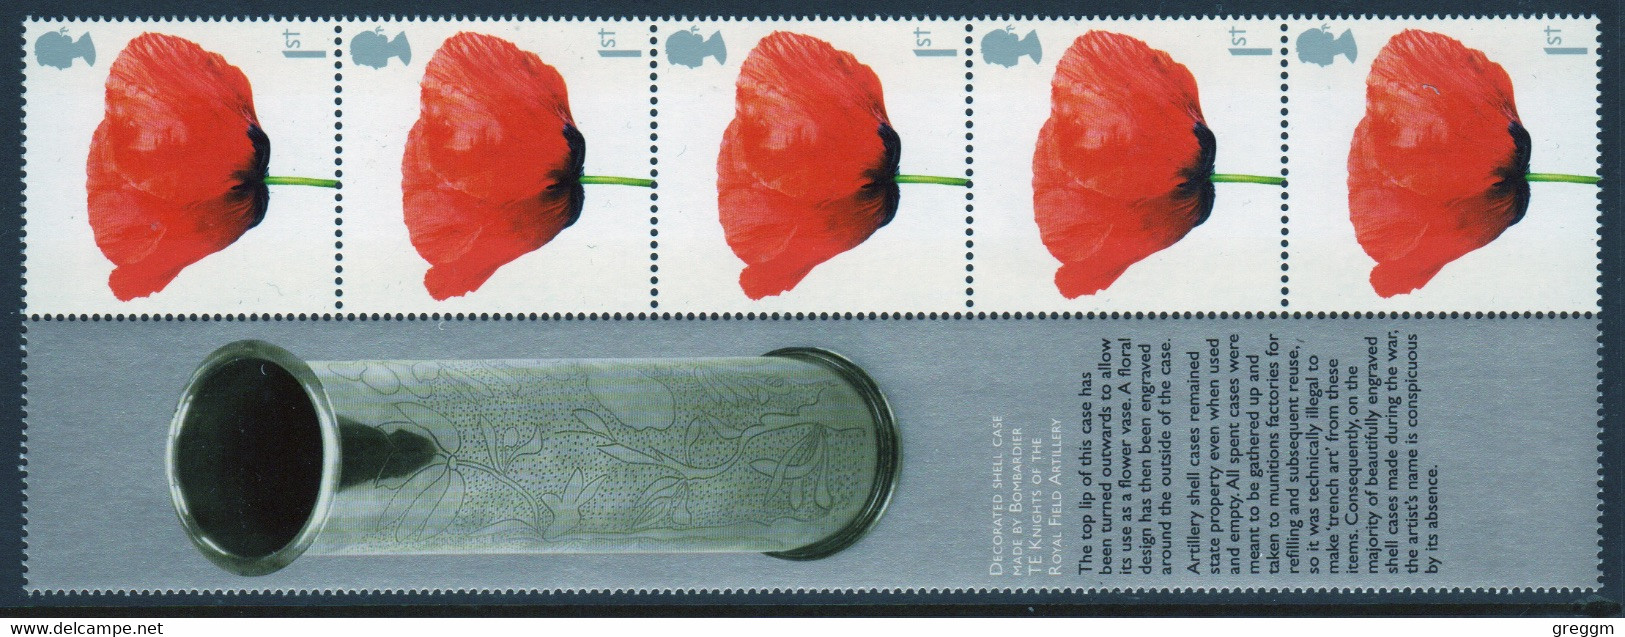 Great Britain 2008 Five 1st Smiler Sheet Commemorative Stamps With Label From The Lest We Forget Set In Unmounted Mint. - Timbres Personnalisés